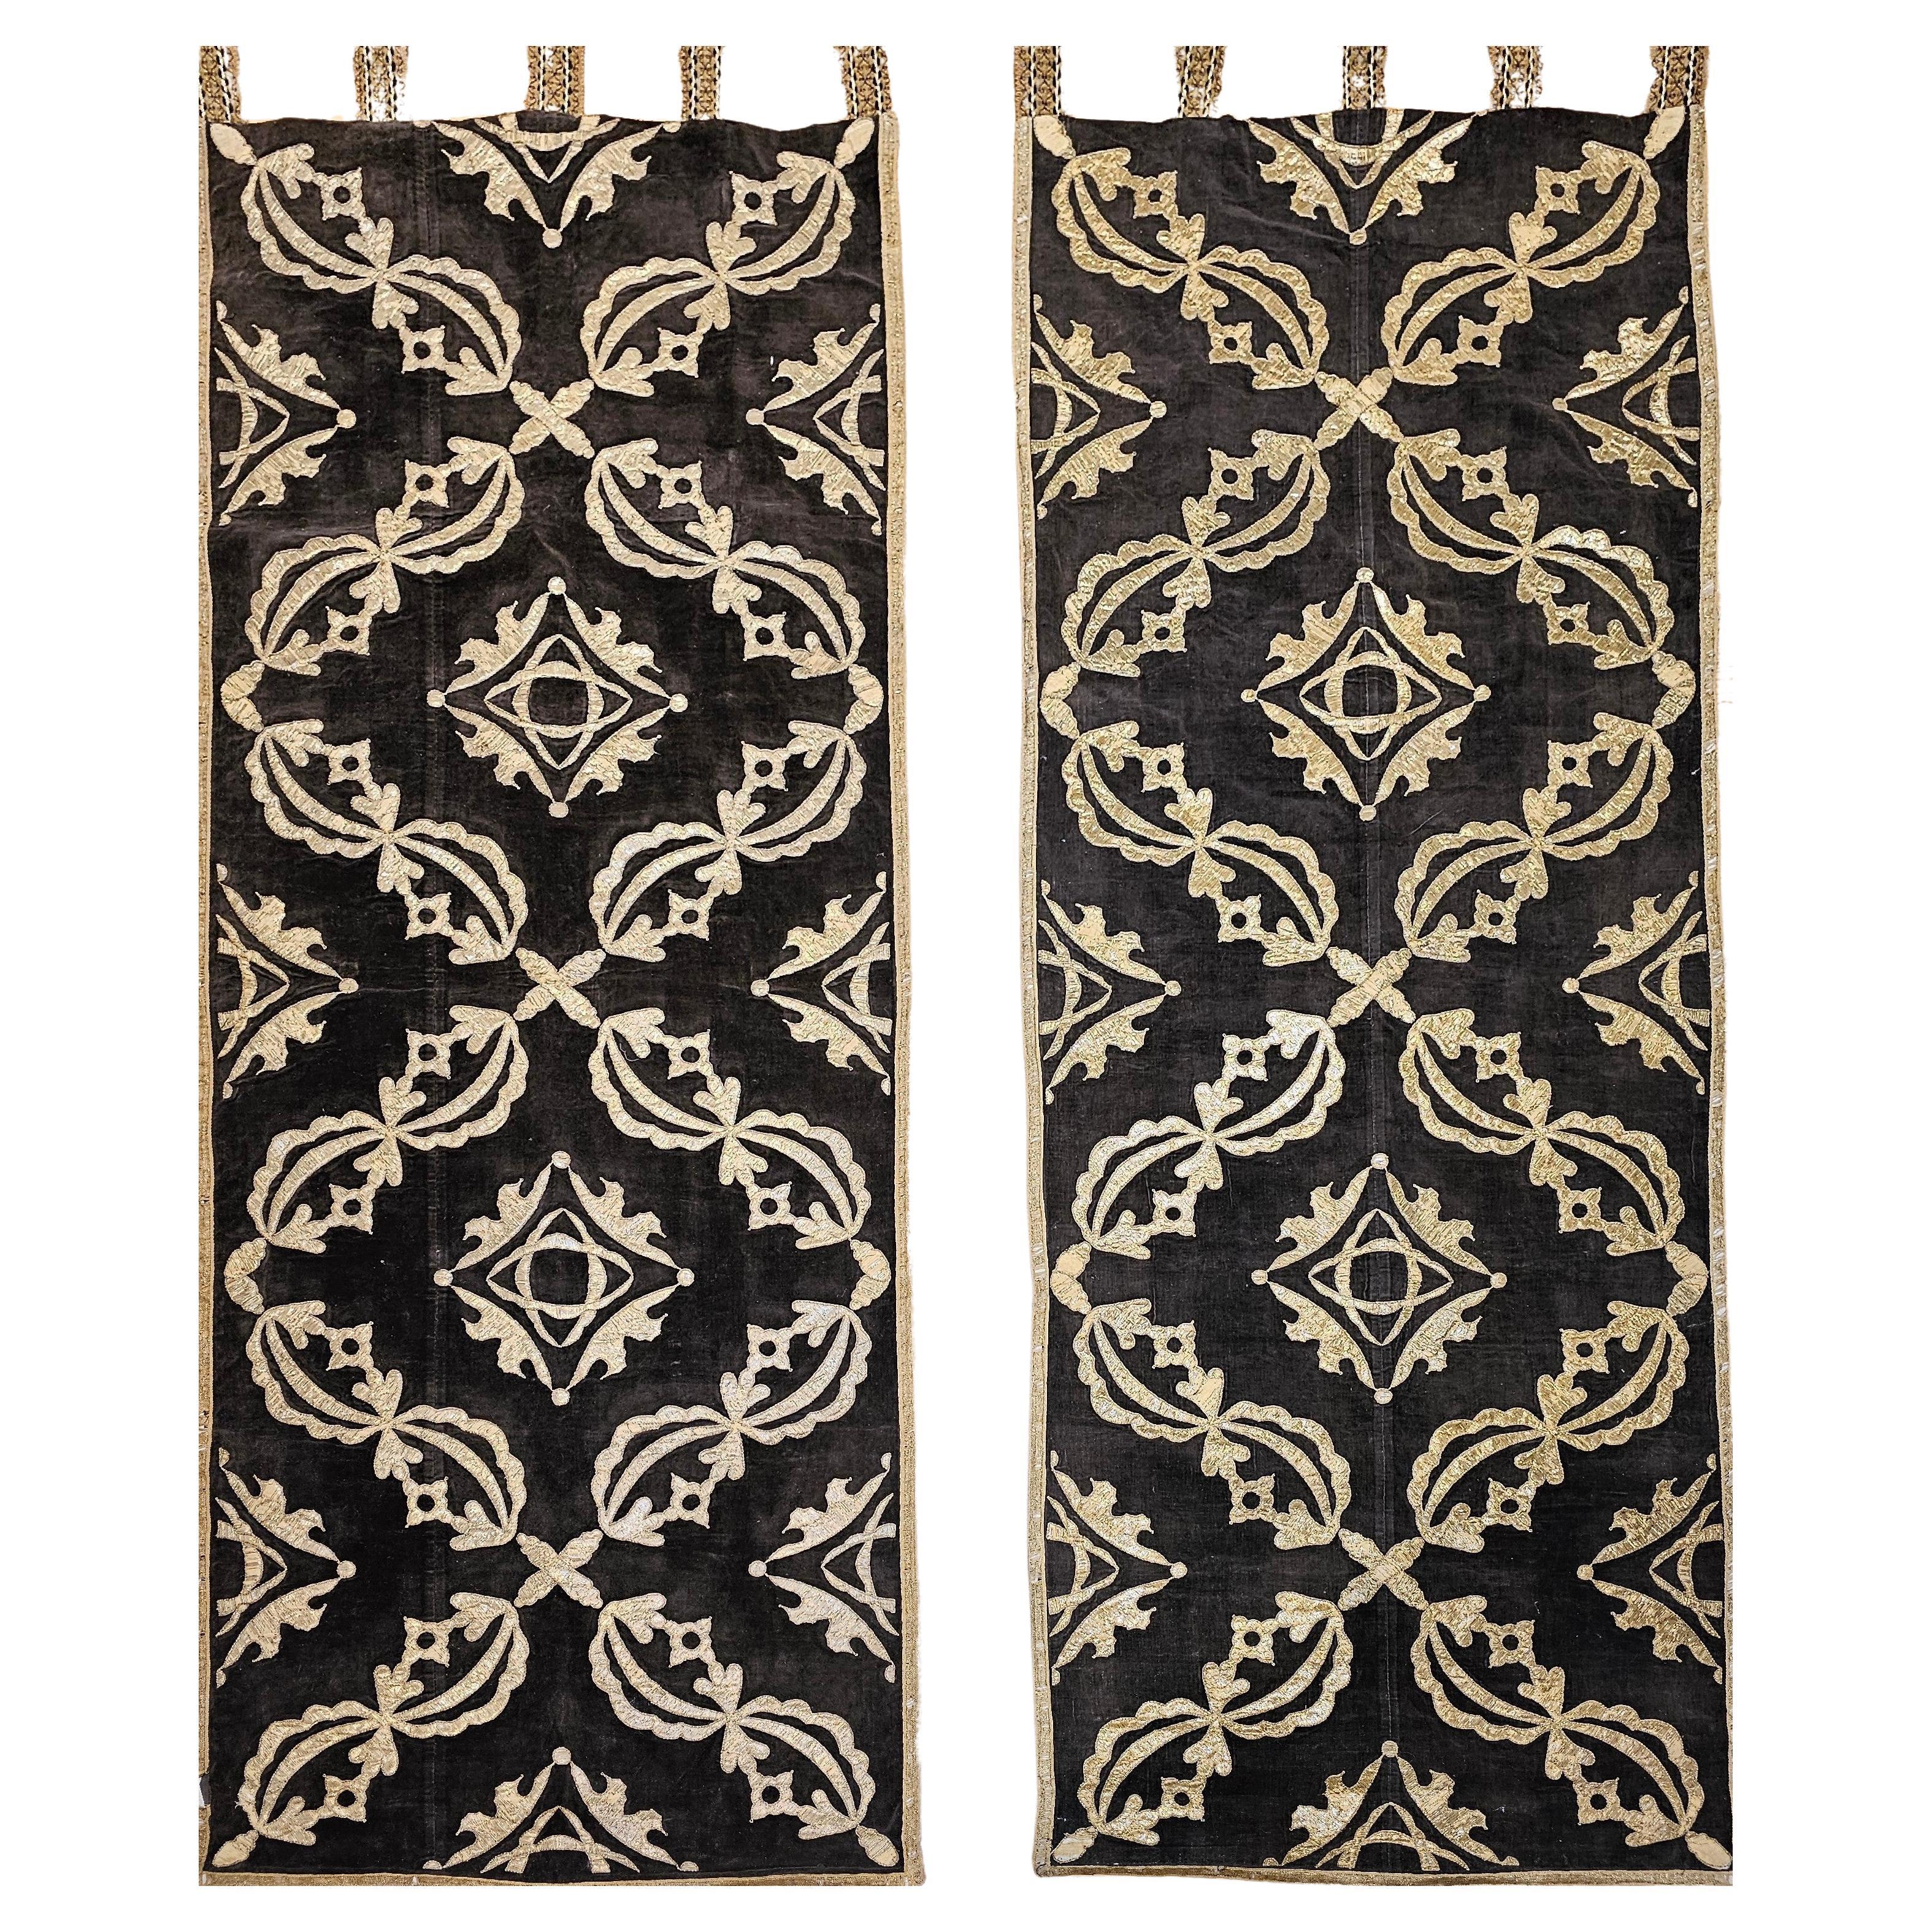 18th Century Ottoman Gilt Threads Brocade Embroidery Textile Panels (A Pair) For Sale